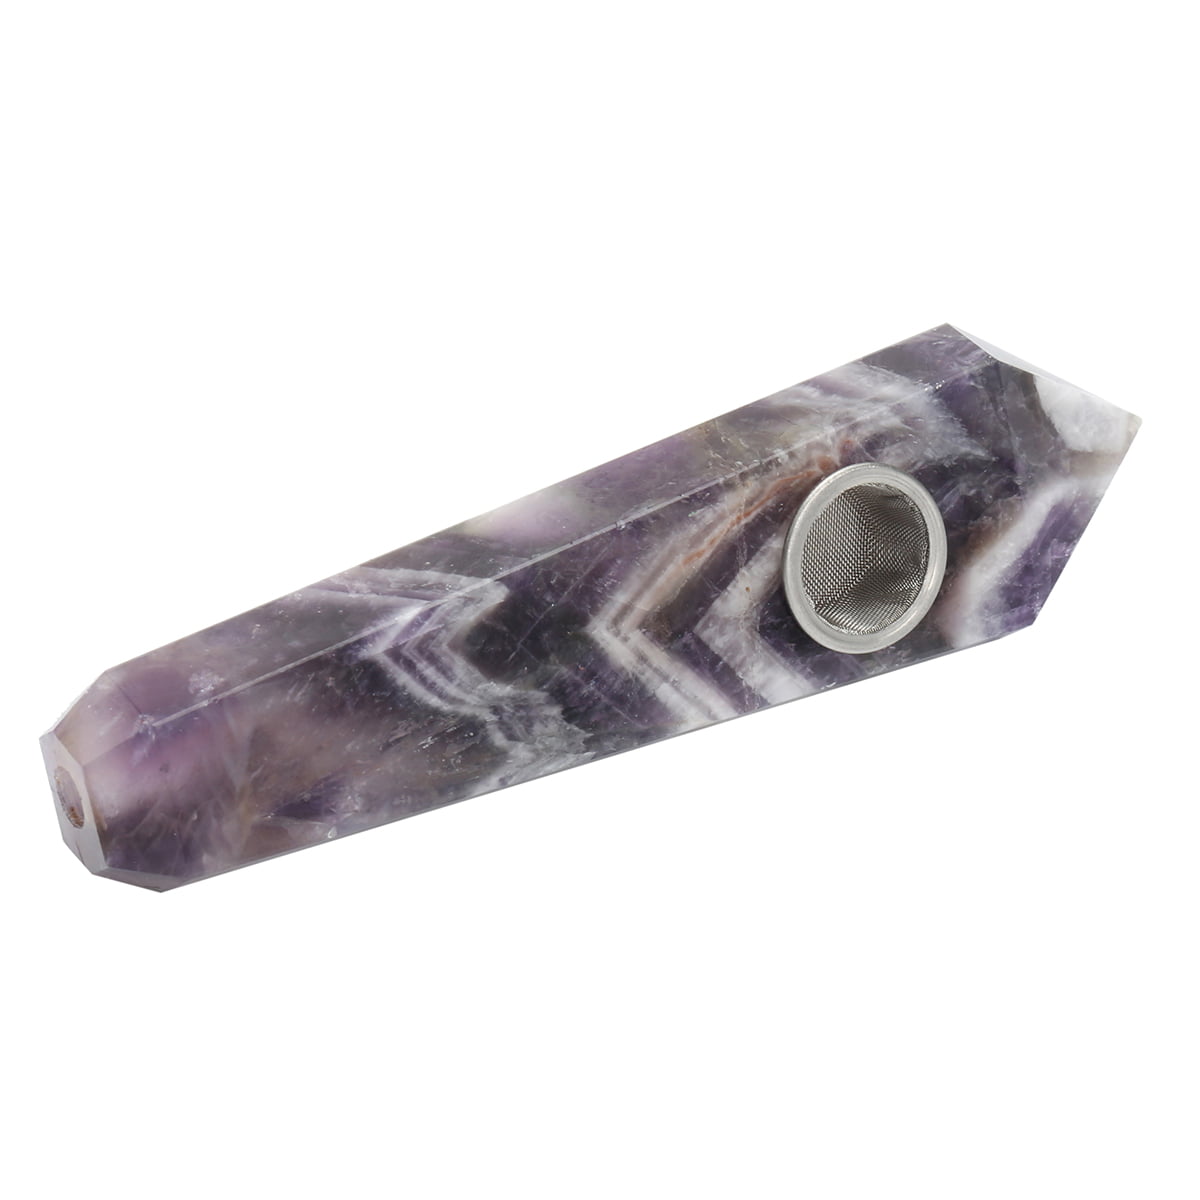 TOP1pc Natural amethyst Pipes Quartz Crystal point Wand healing w/Carb Hole H105